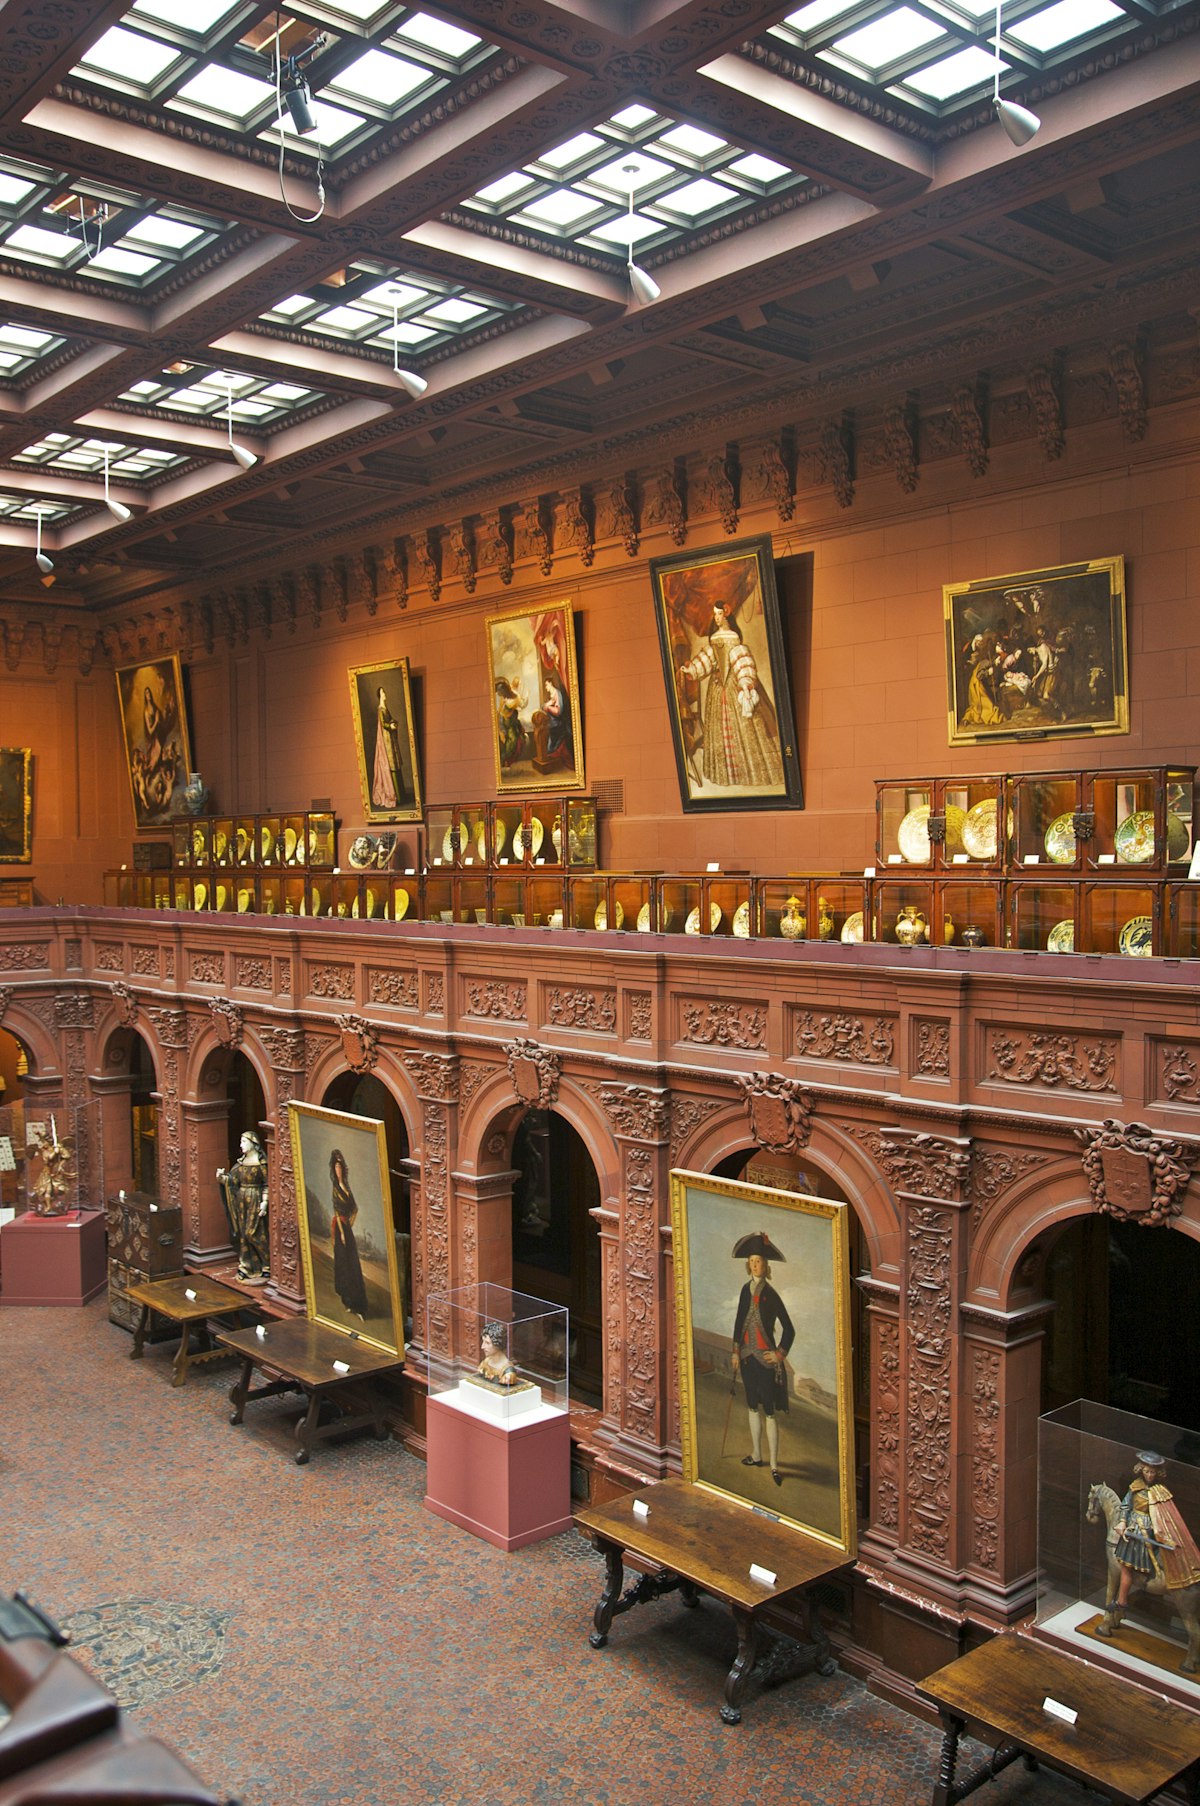 Interior view of Hispanic Society of America showing twostory gallery with paintings, sculpture, decorative arts, archaeology, prints and photographs, Upper West Side, New York, NY, U.S.A.